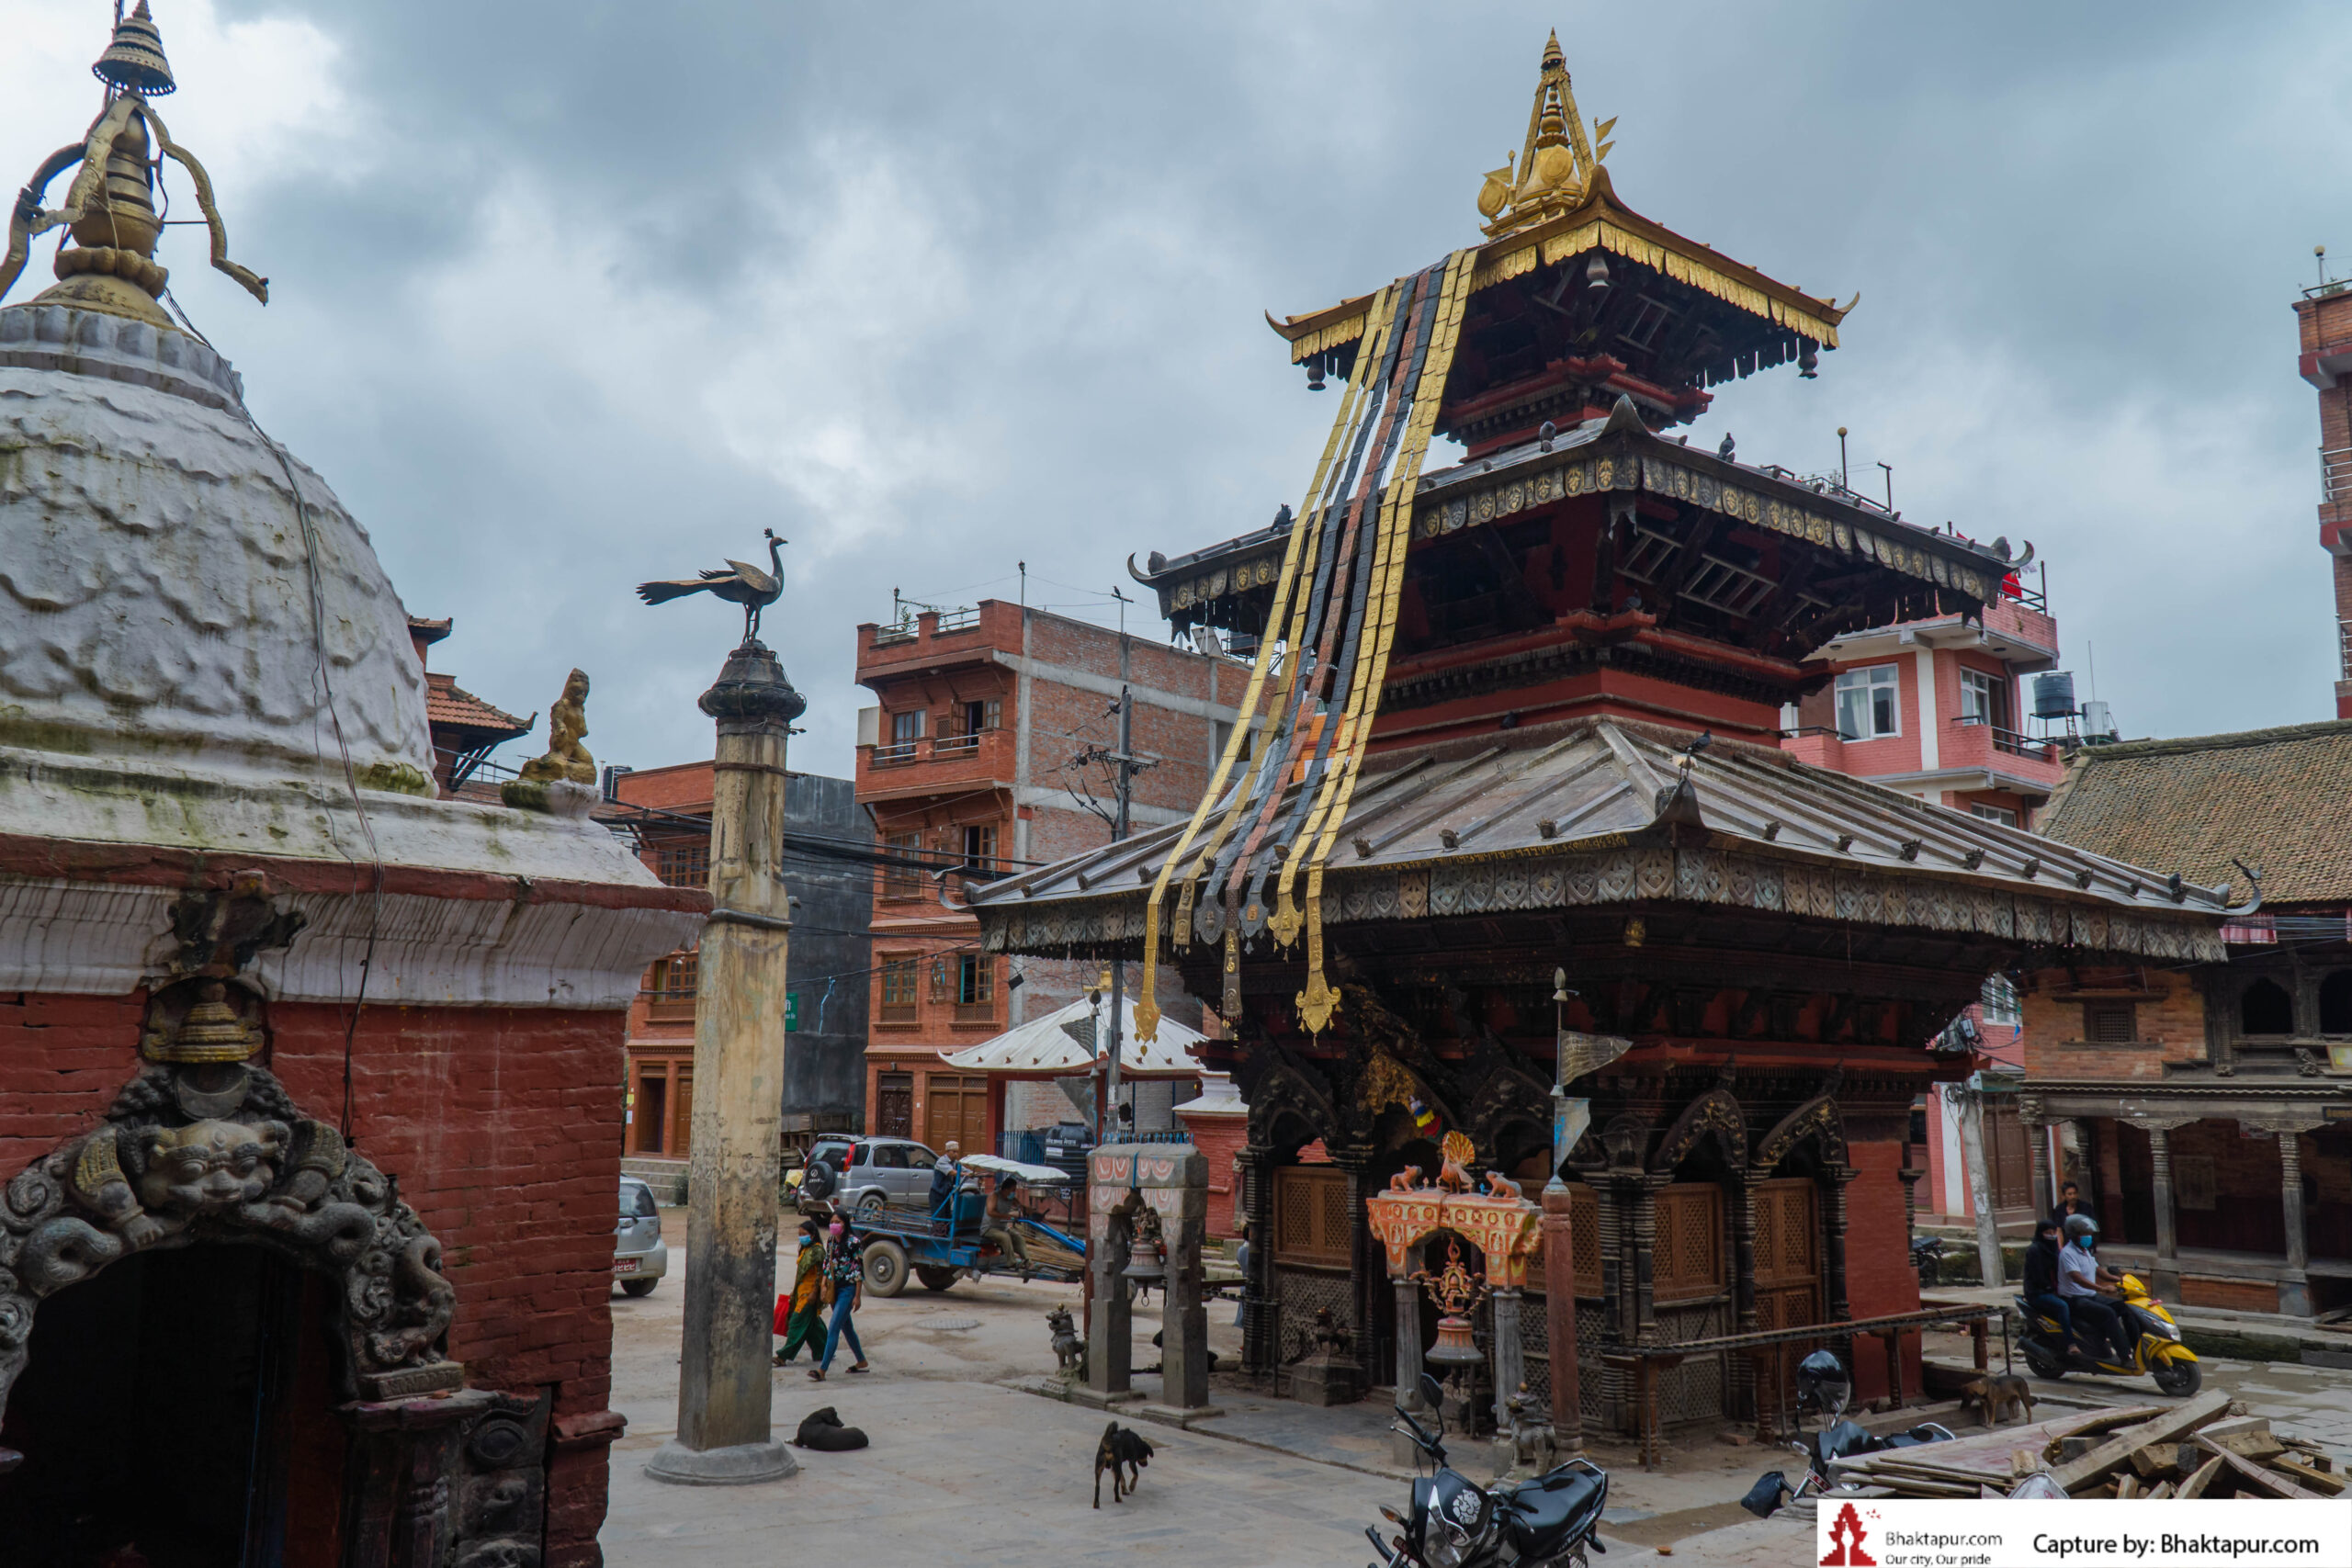 Balkumari Temple of Thimi; a temple in the middle of the city image